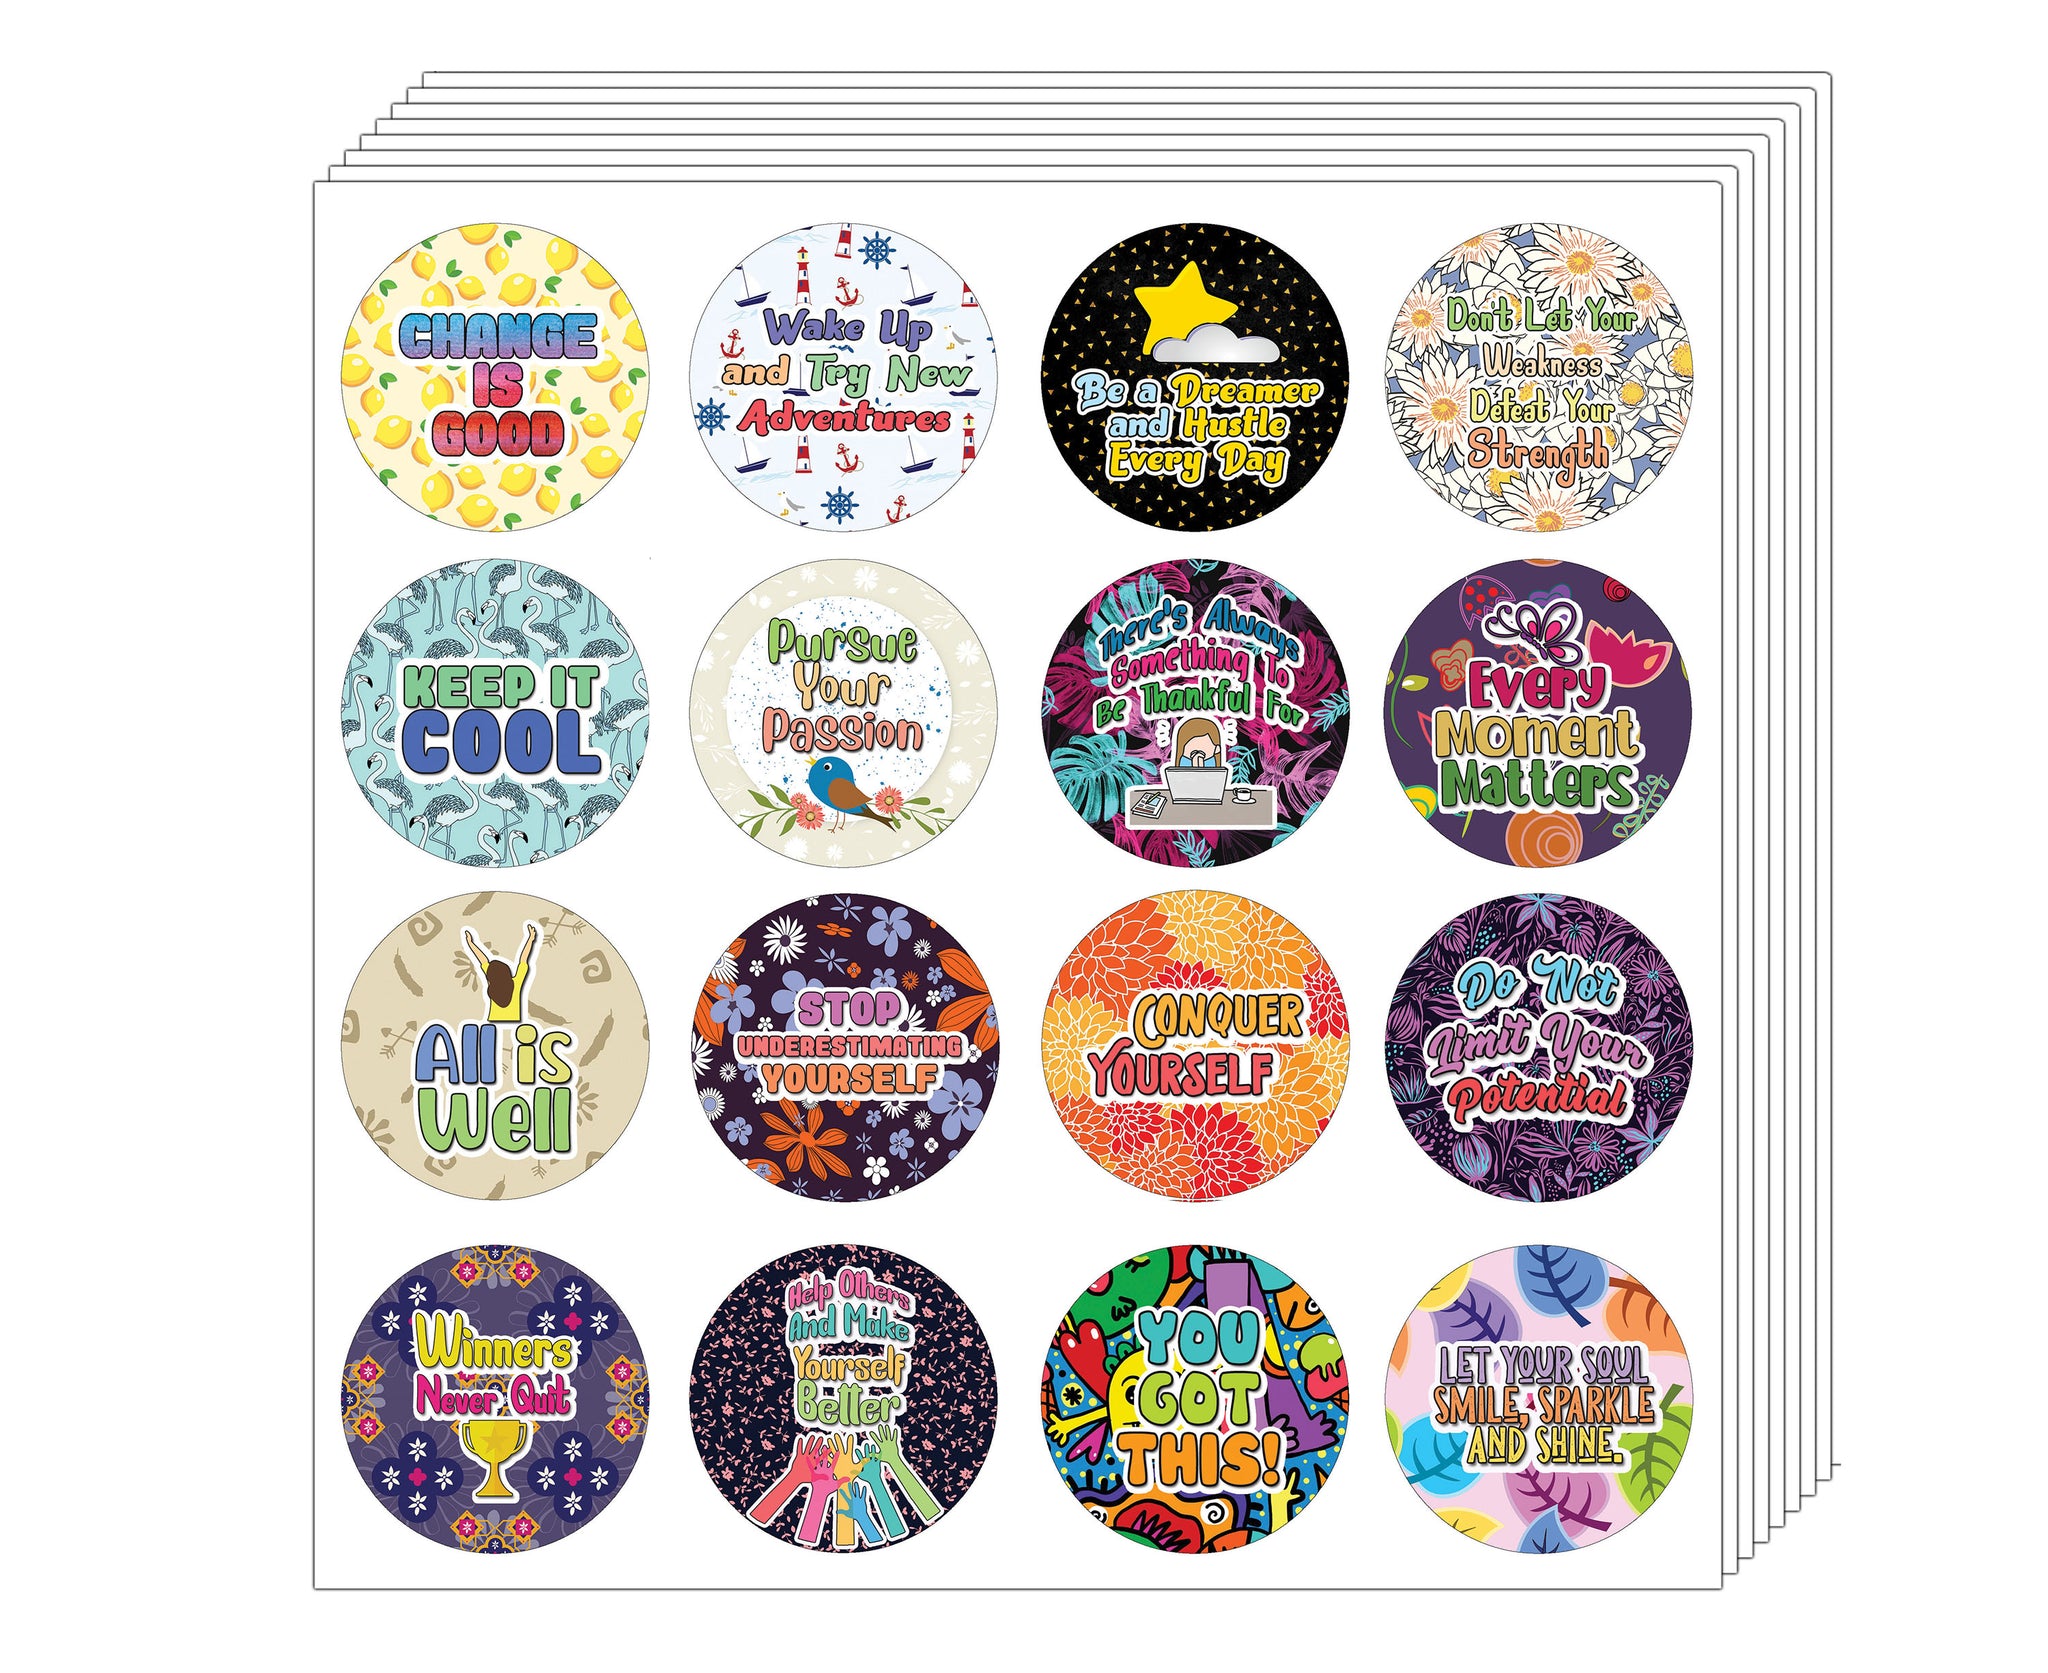 Creanoso Positive Motivational Stickers Series 3 (20-Sheet) - Premium Quality Gift Ideas for Children, Teens, & Adults for All Occasions - Stocking Stuffers Party Favor & Giveaways